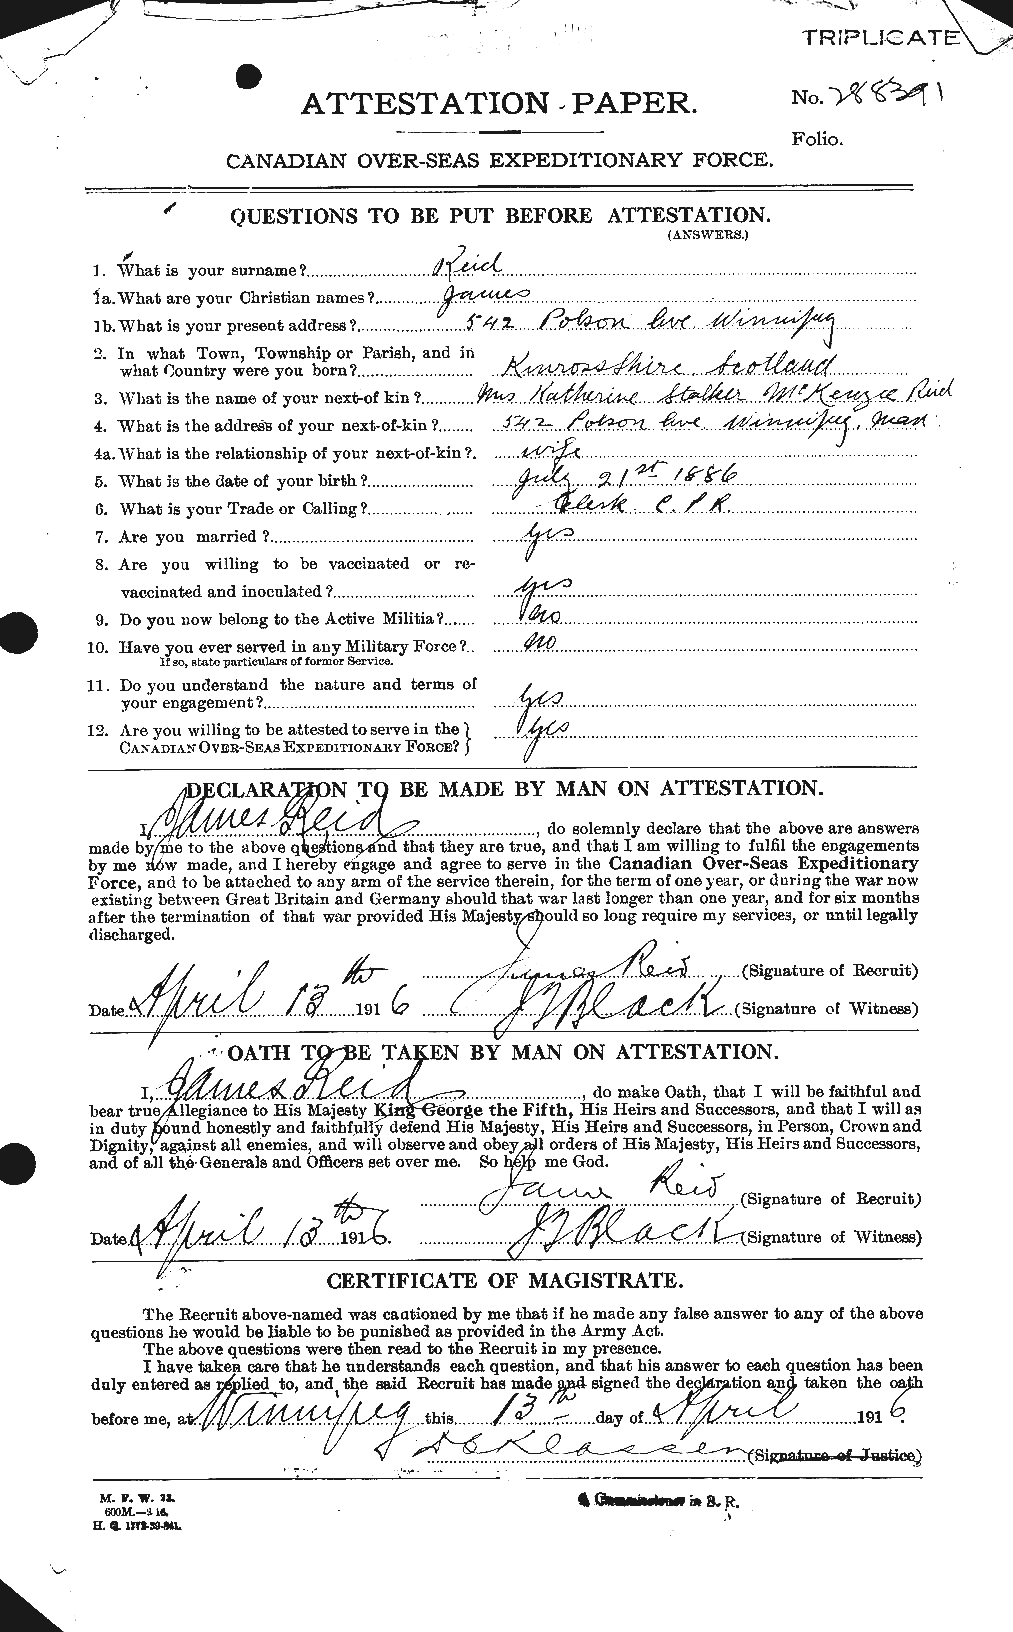 Personnel Records of the First World War - CEF 598683a